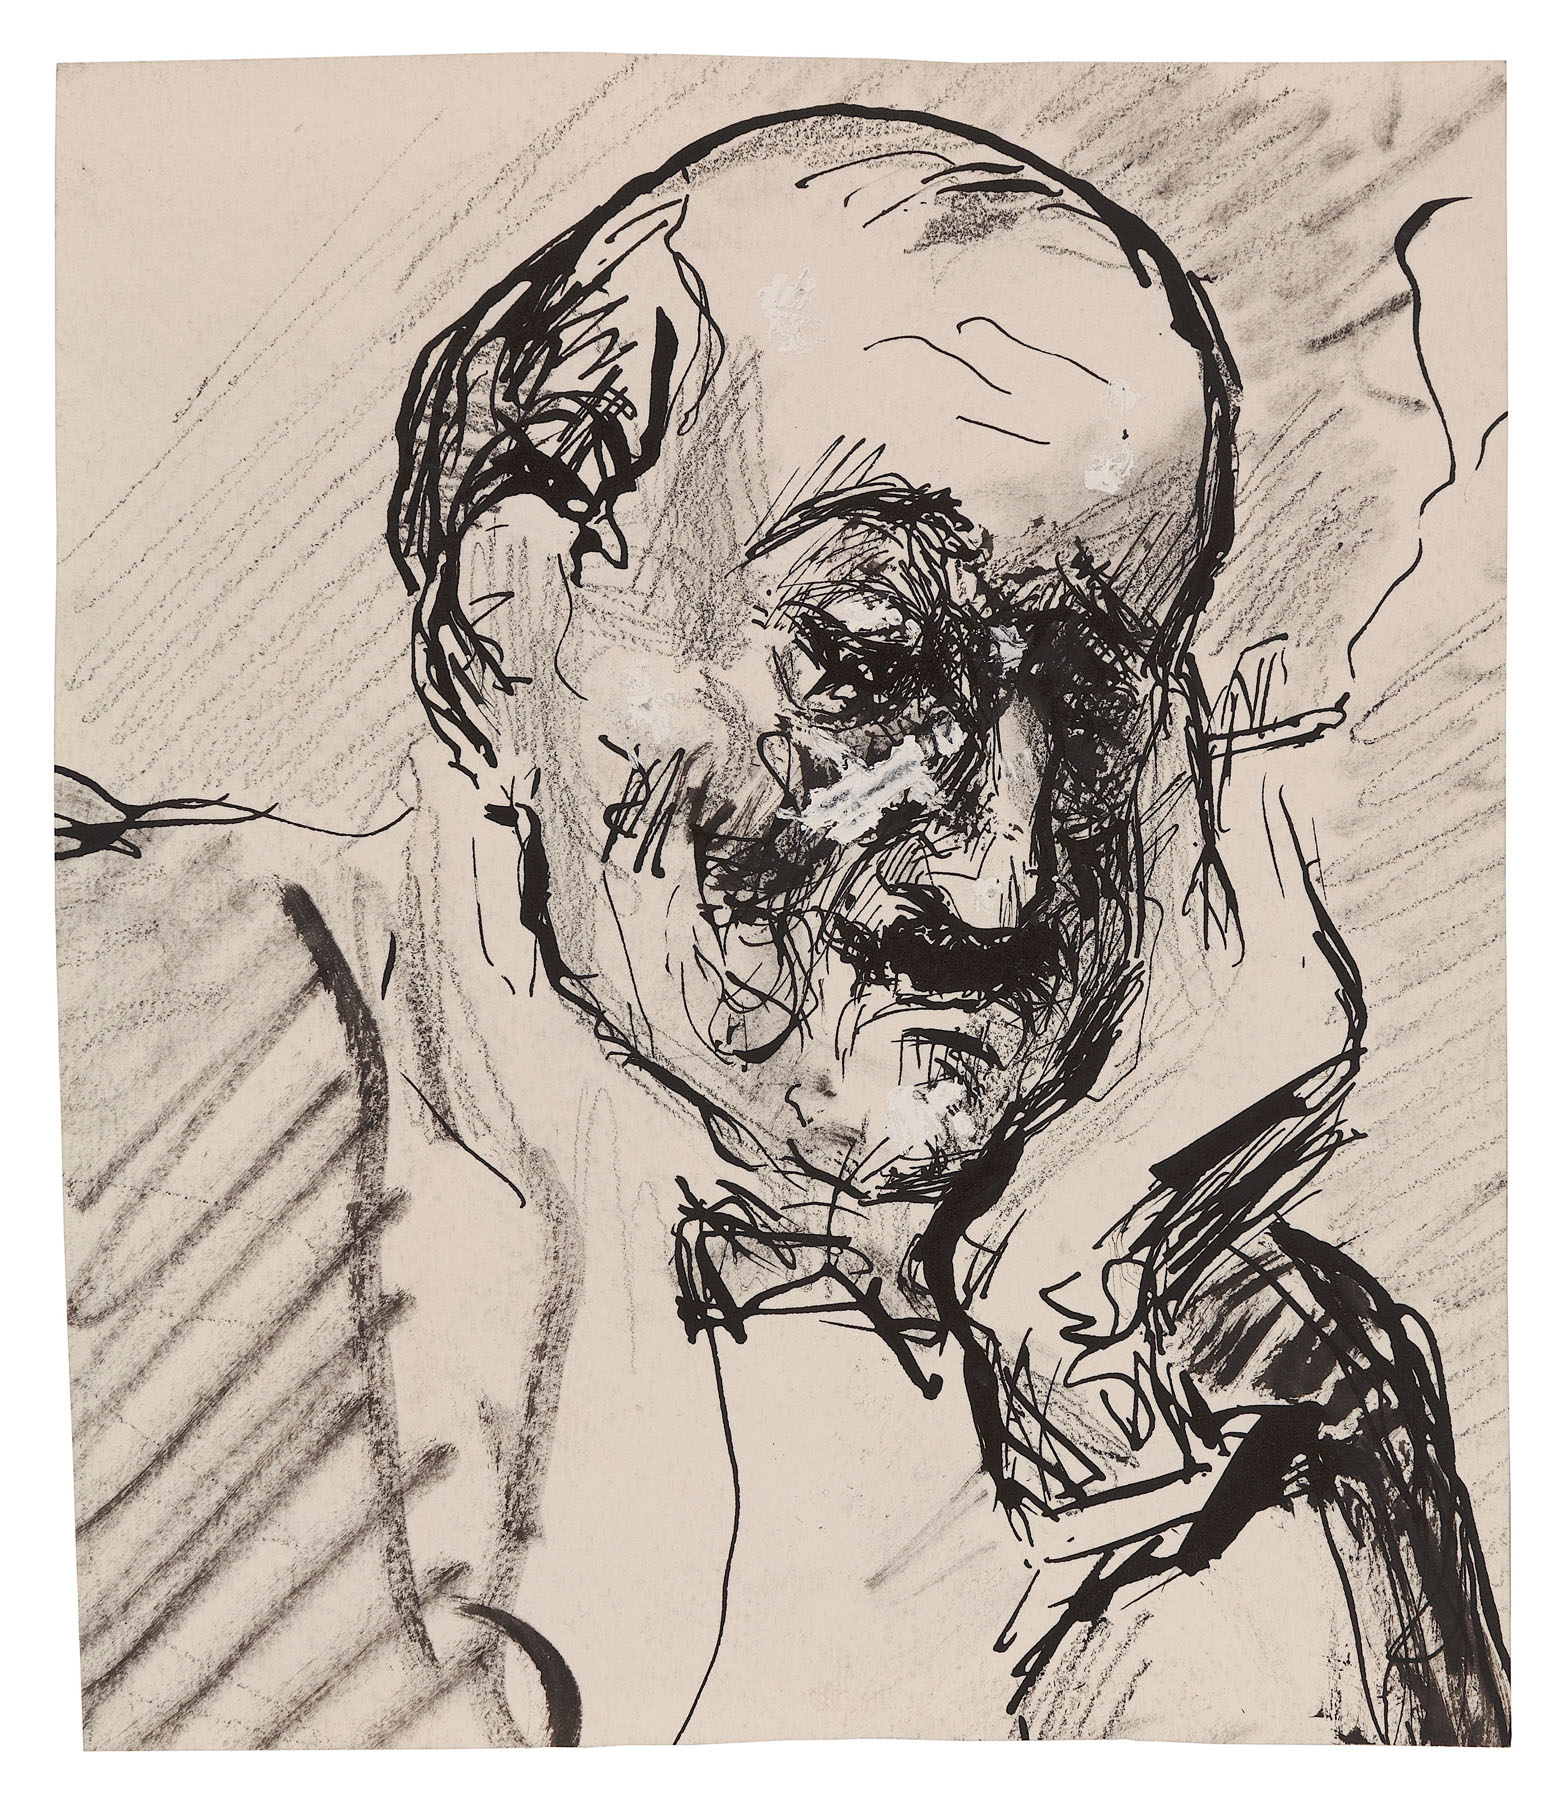 Fritz Ascher, Portrait Max Liebermann, c. 1910. White gouache over black ink and graphite on paper, 8.3 x 7.2 in. (21.3 x 18.4 cm). Private collection. Photo Malcolm Varon ©Bianca Stock